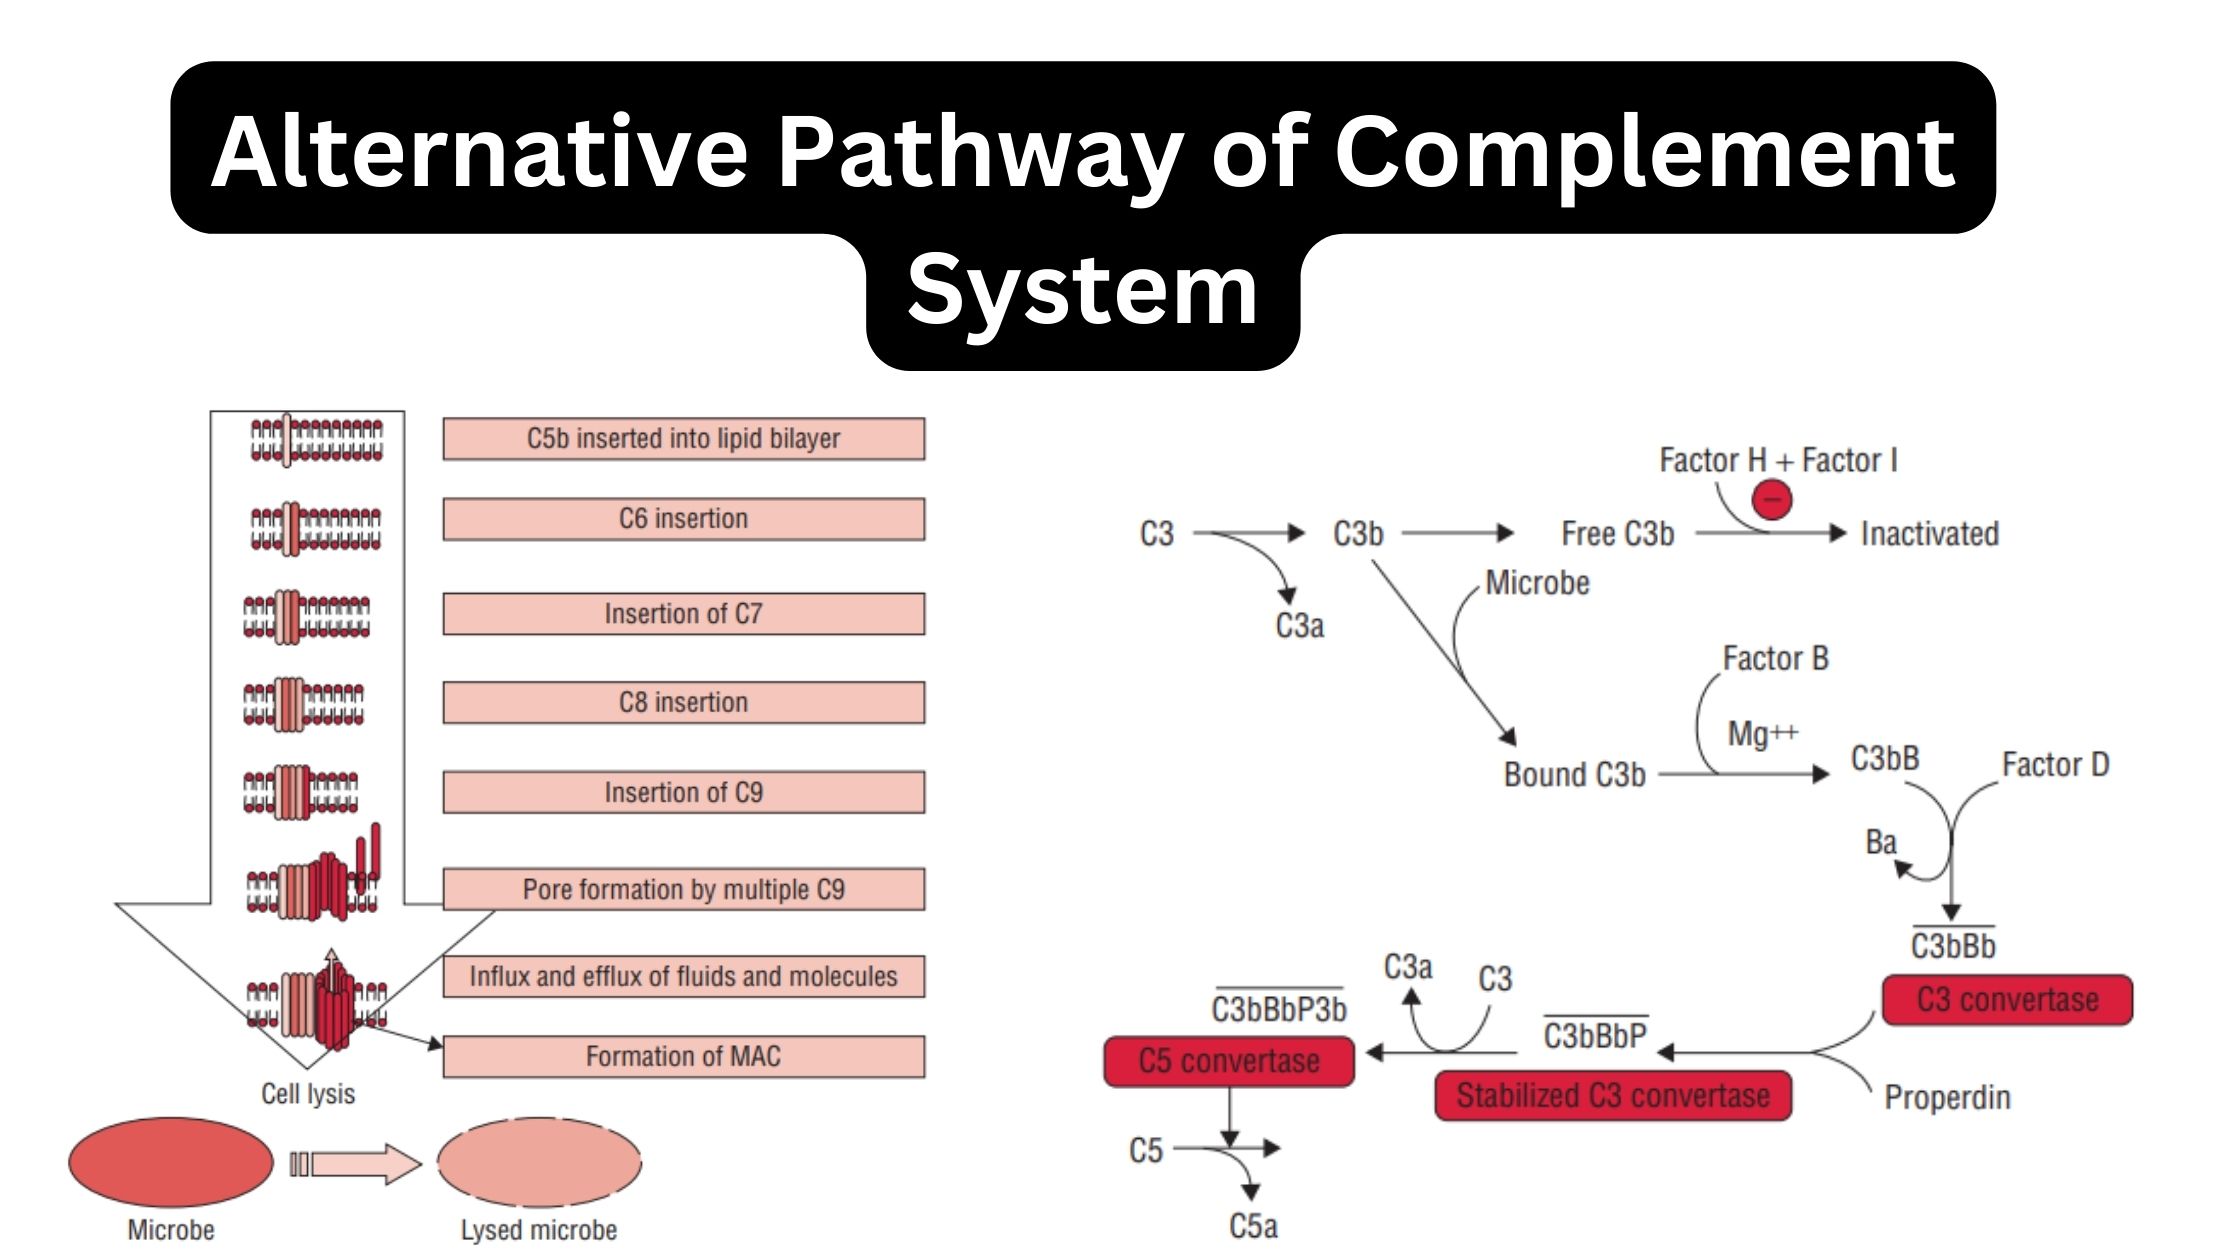 Alternative-Pathway-of-Complement-System.jpg